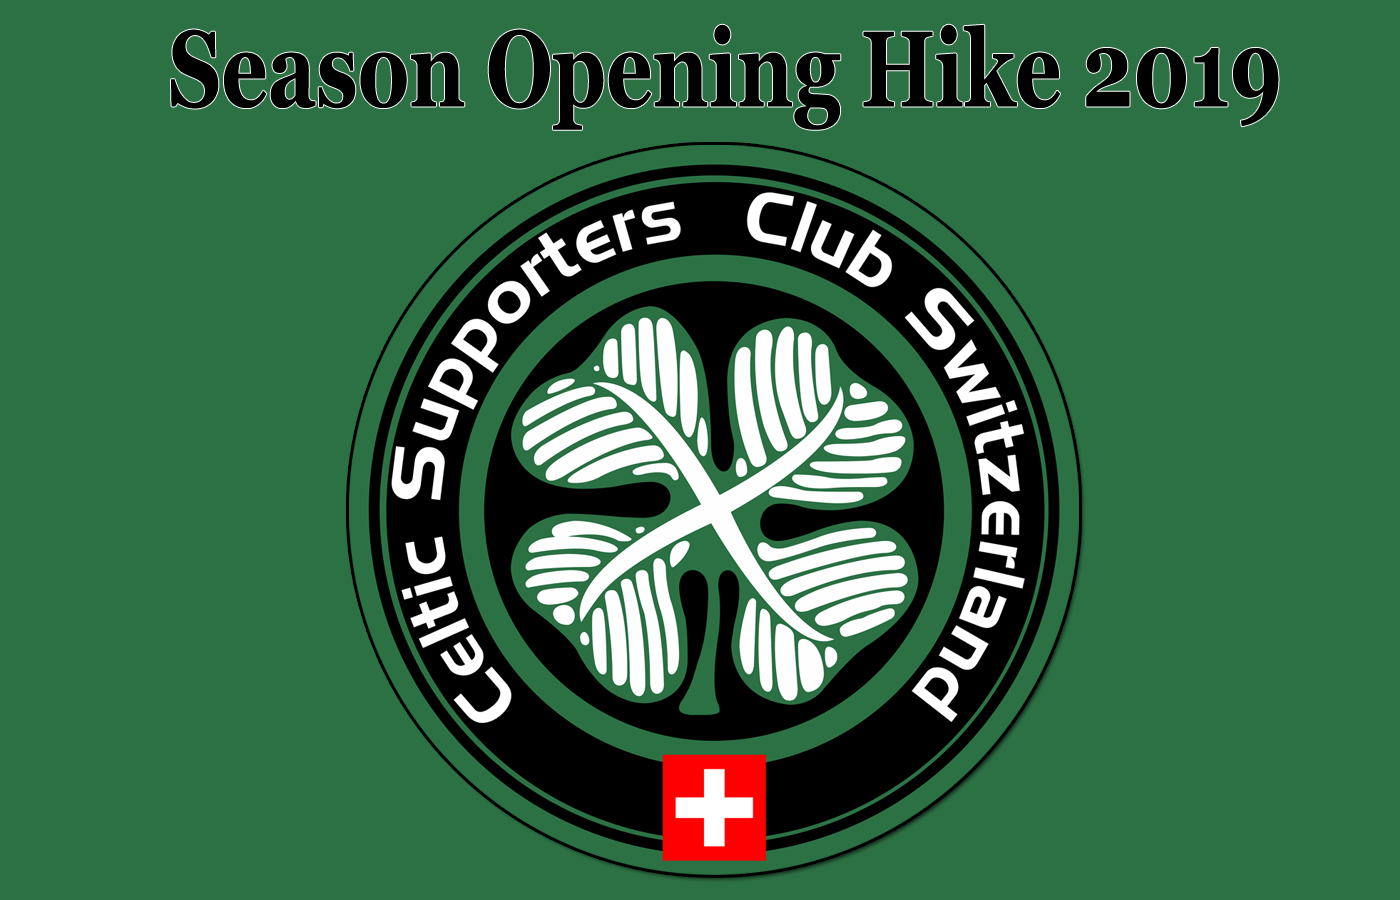 Season Opening Hike 2019 and Glasgow Derby